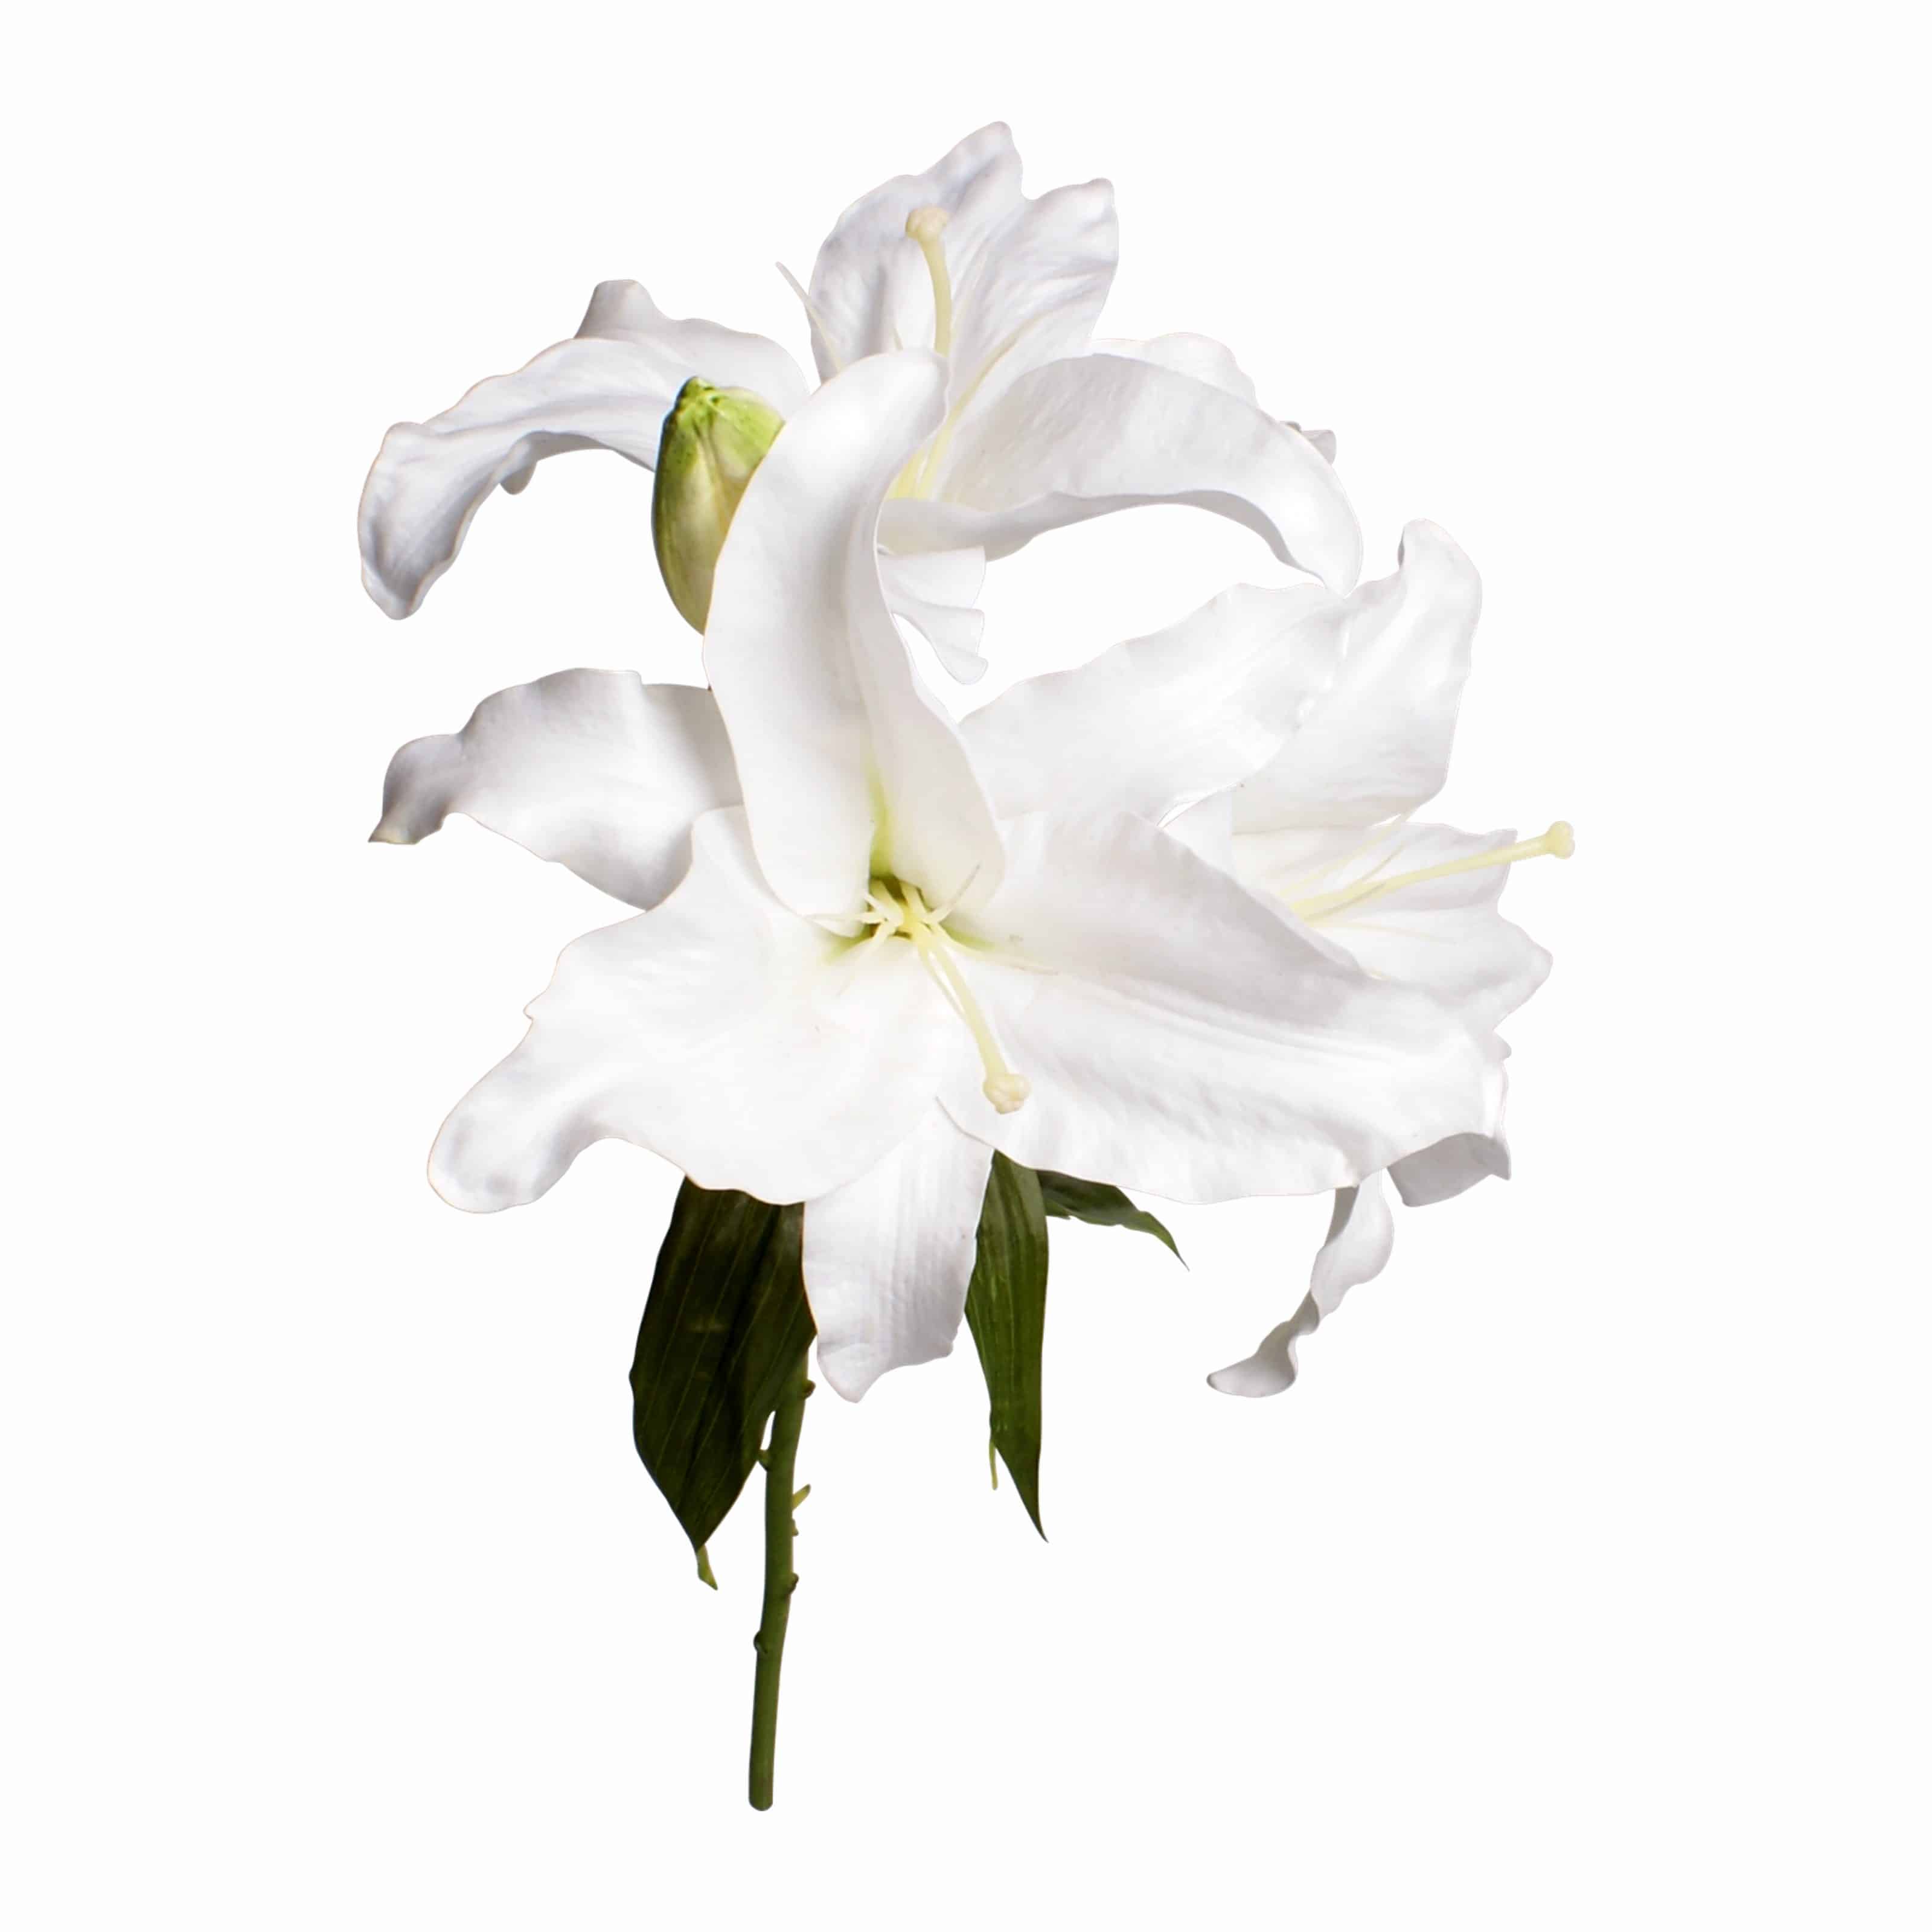 Our Casablanca lilies have three beautiful fully bloomed heads with a natural bud. The natural pure white colour and real touch texture is one of the best we found.